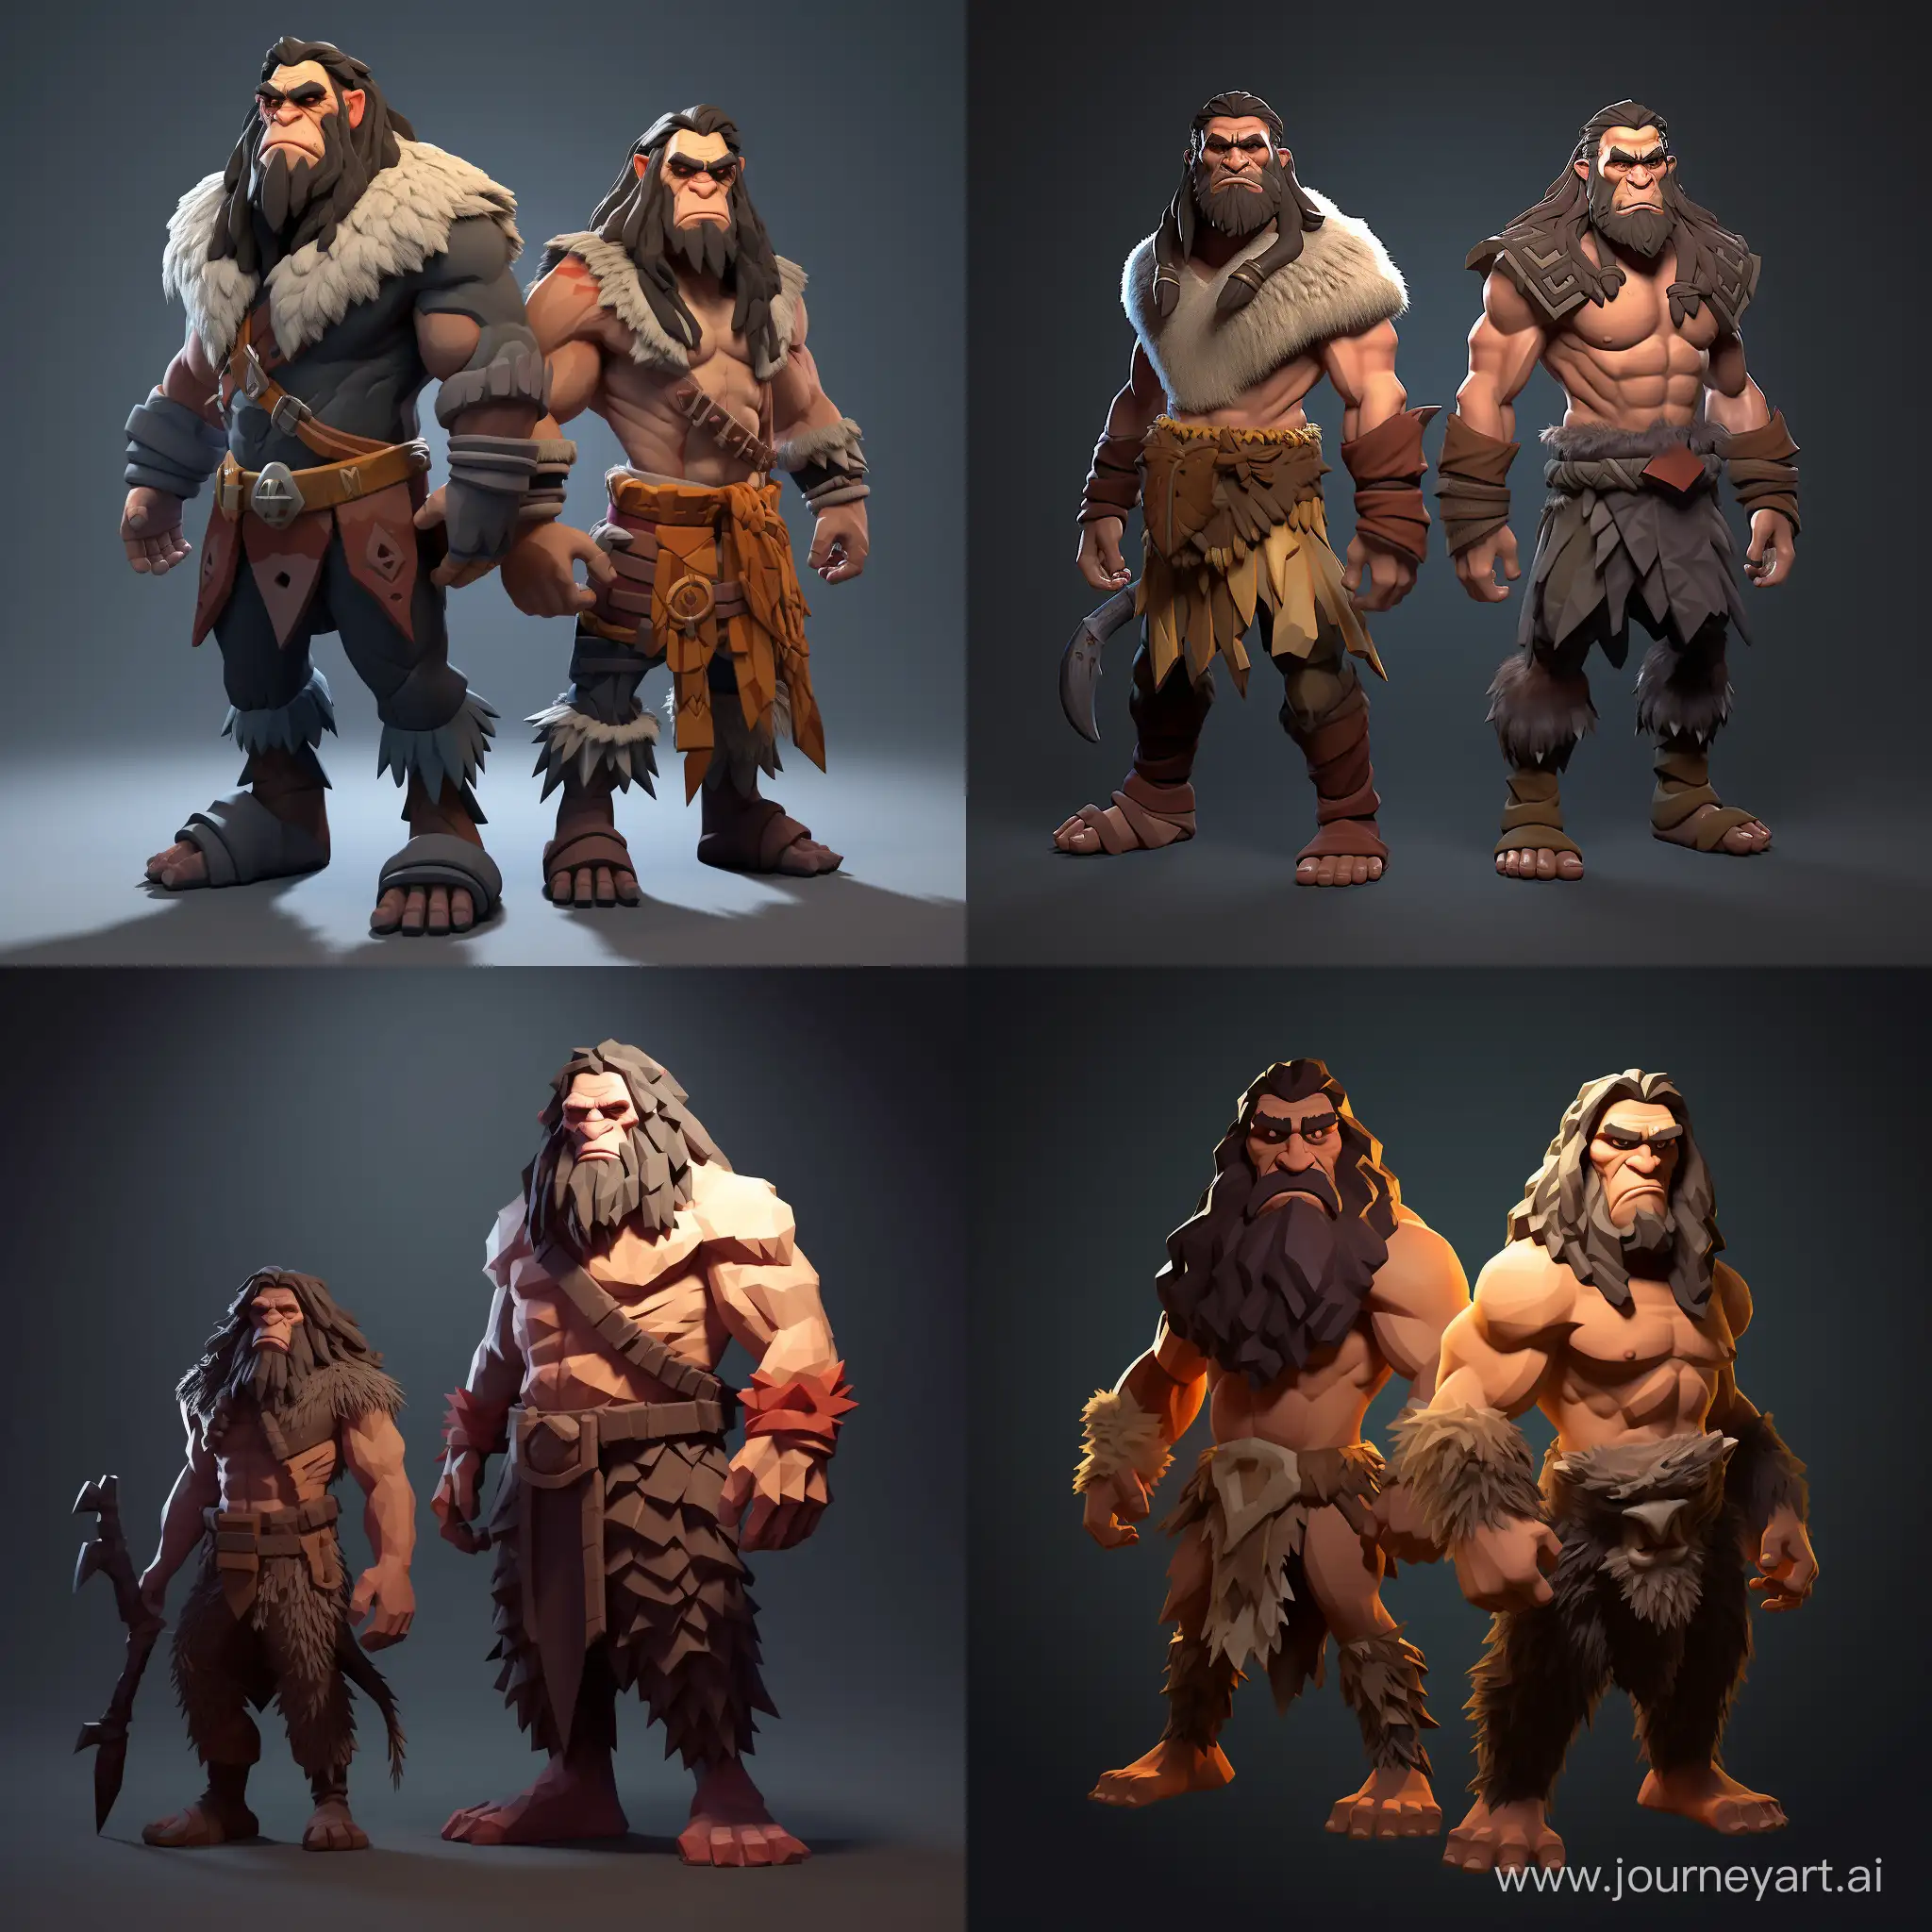 low poly neanderthal and dark knight model for a game avatar